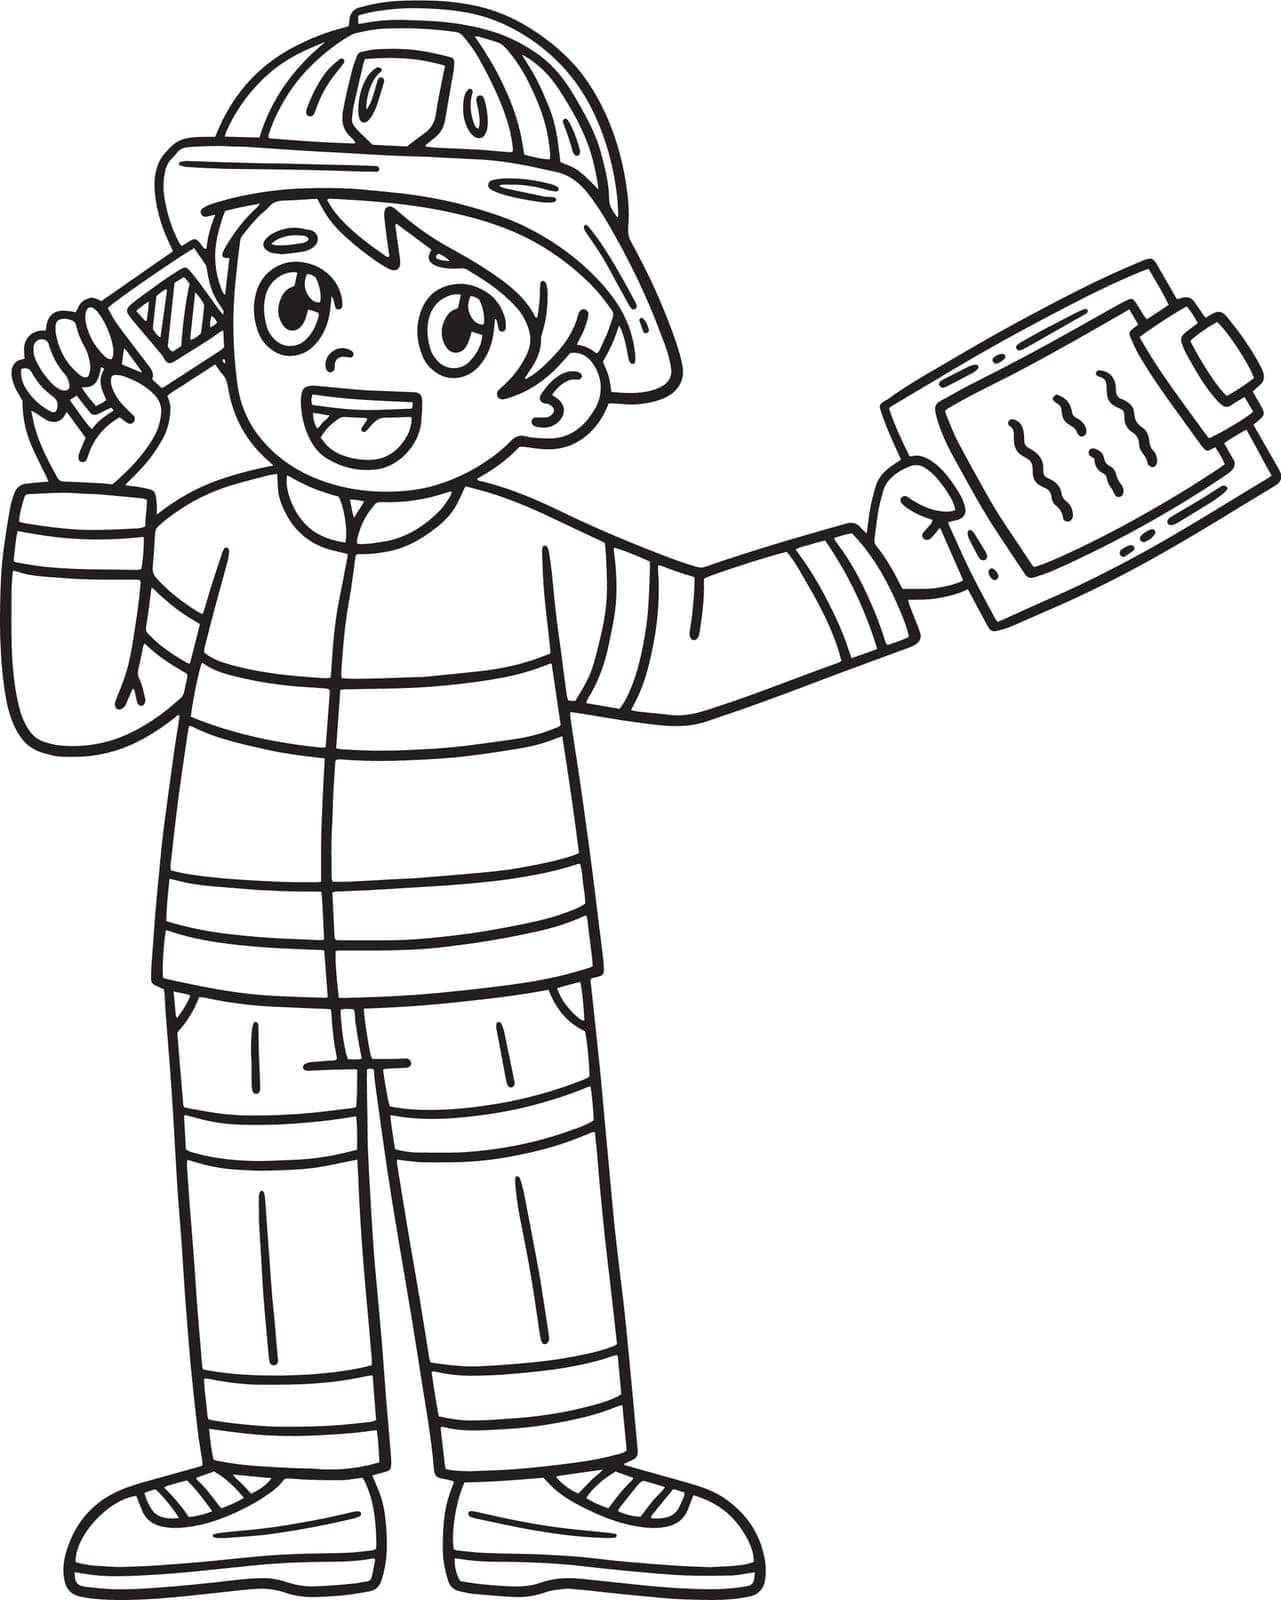 Firefighter Receiving Call Isolated Coloring Page by abbydesign